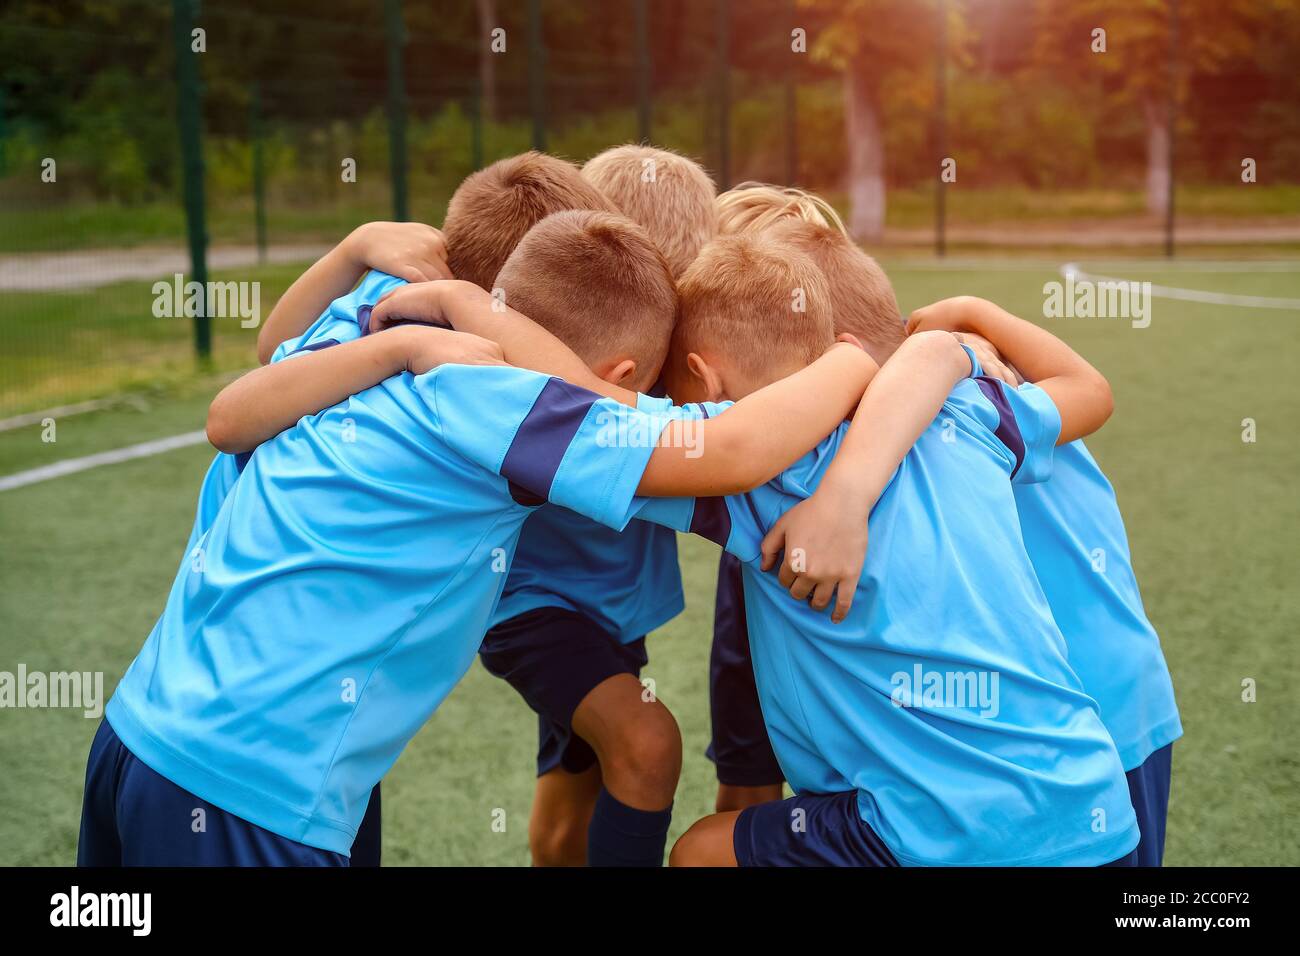 Kids football team embrace each other on football field before match  Stock Photo